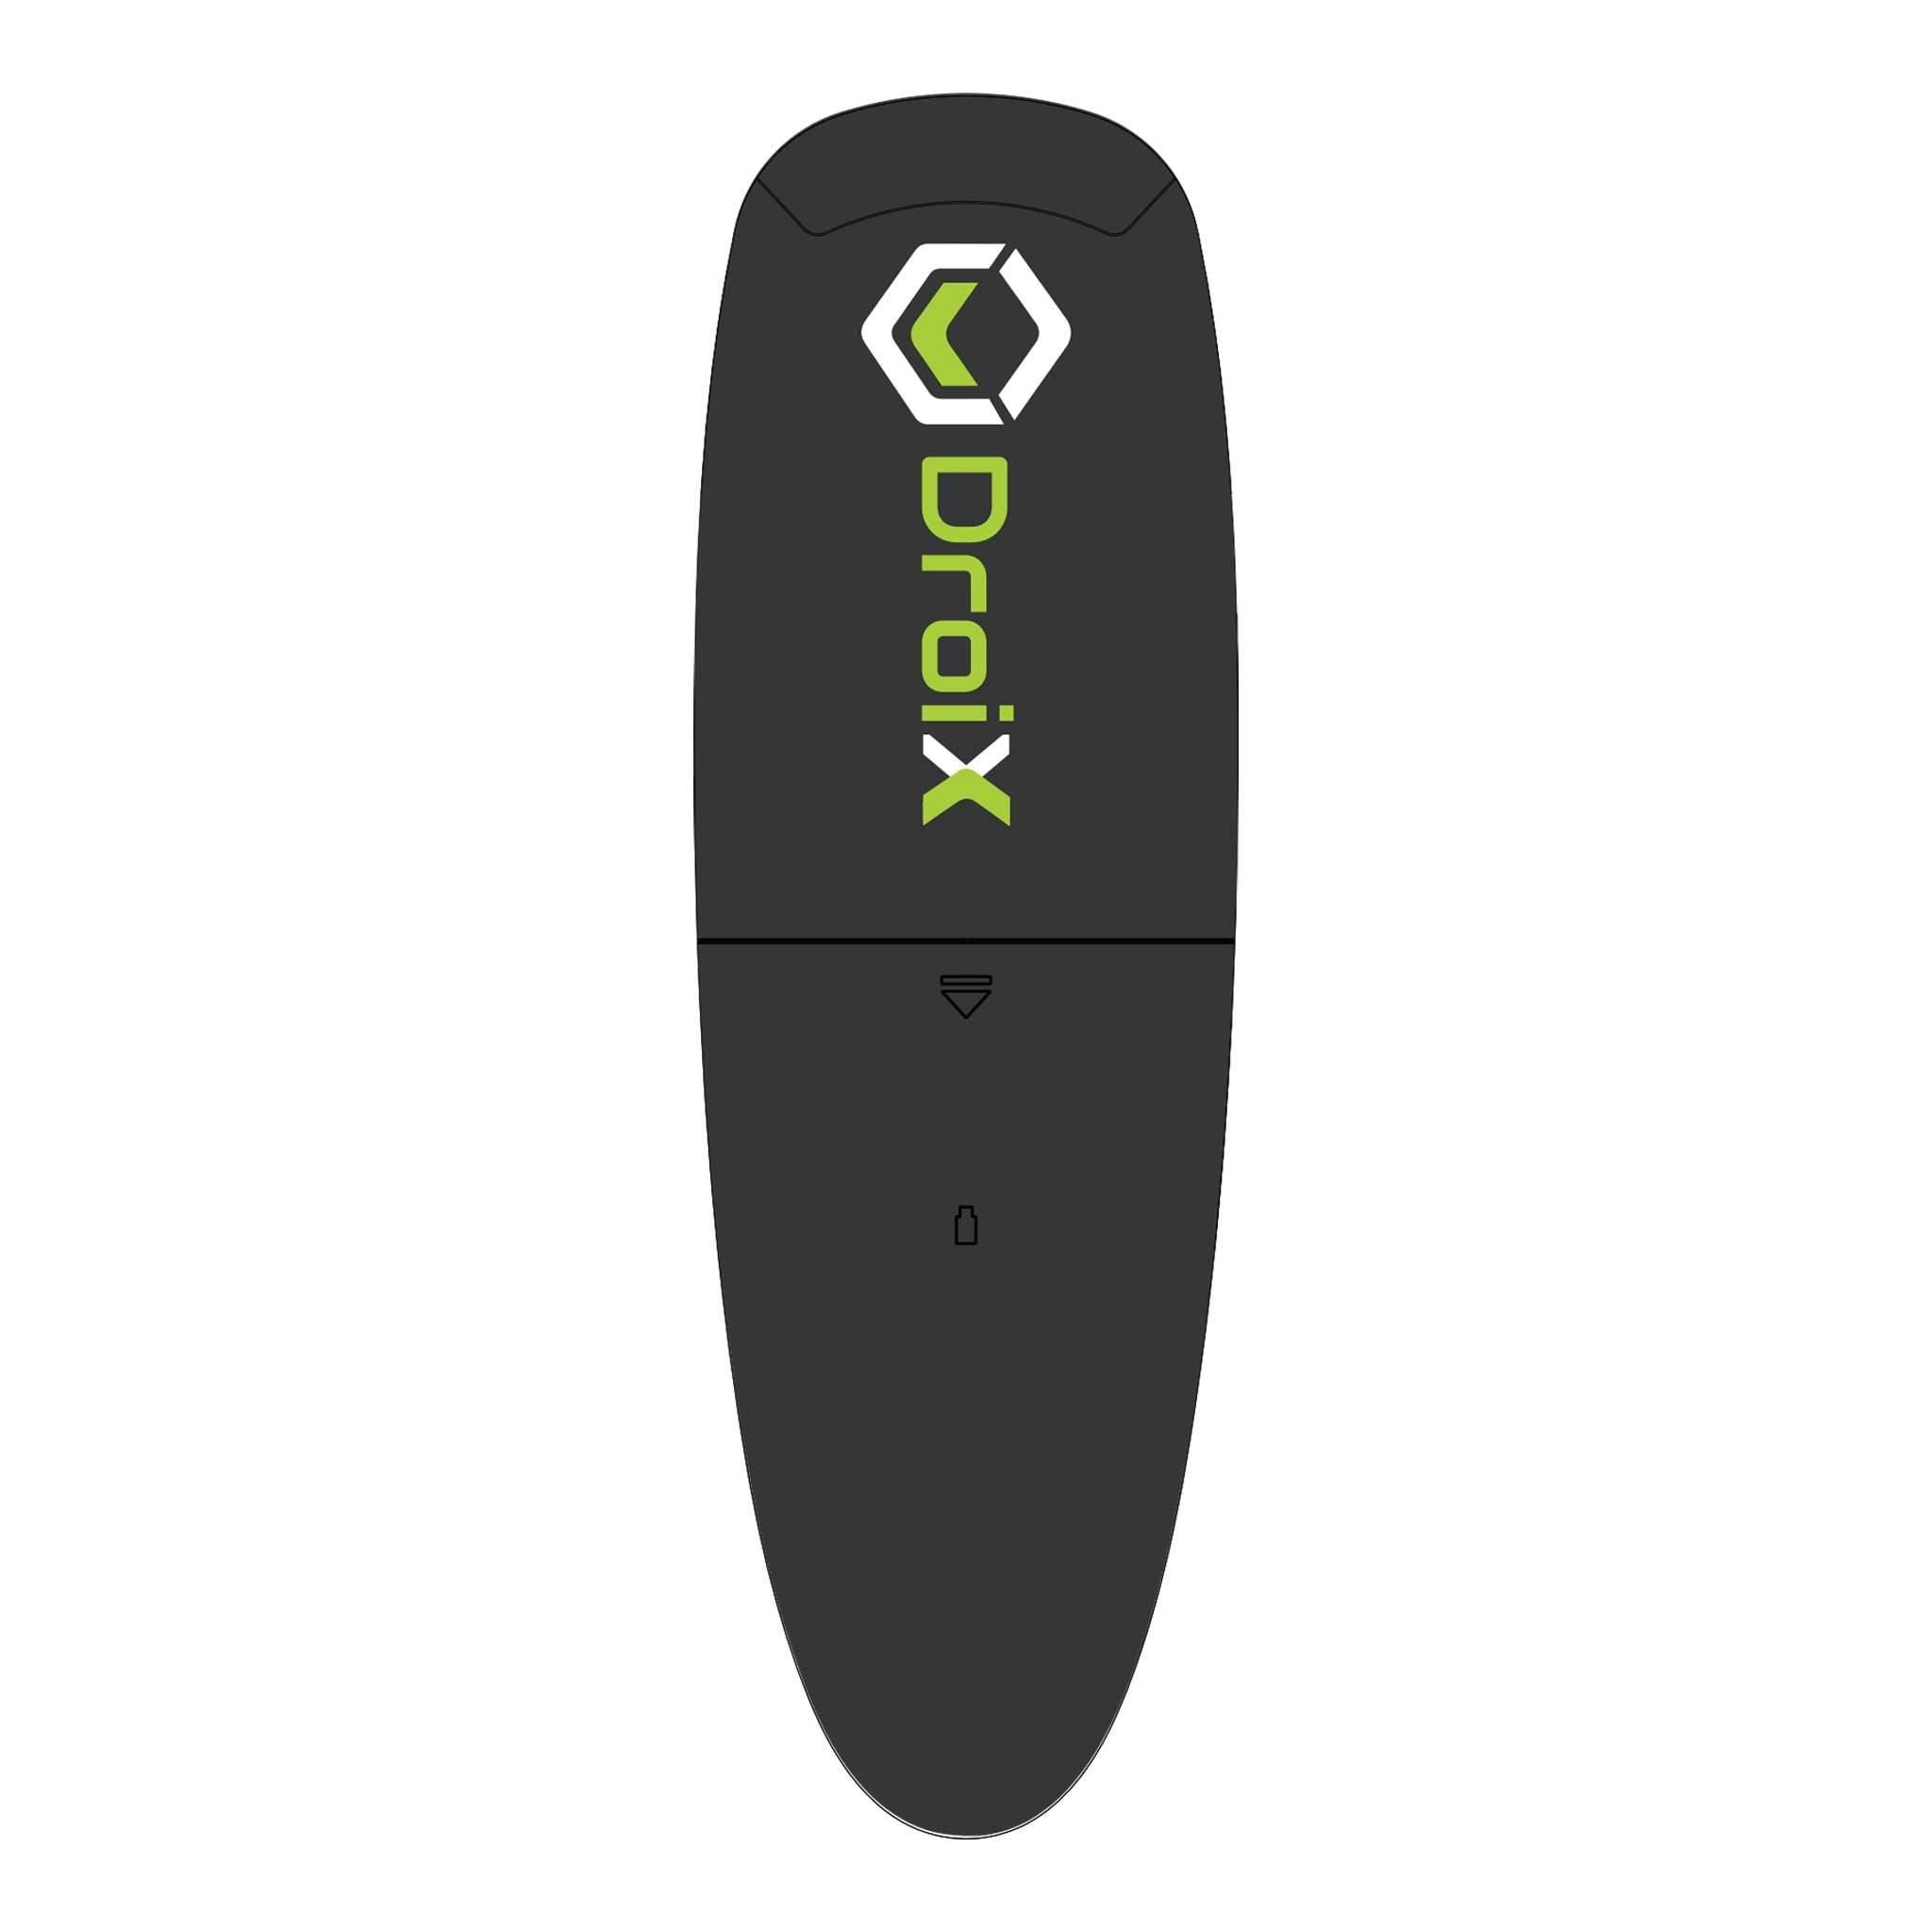 DroiX G10 Air Mouse from the back